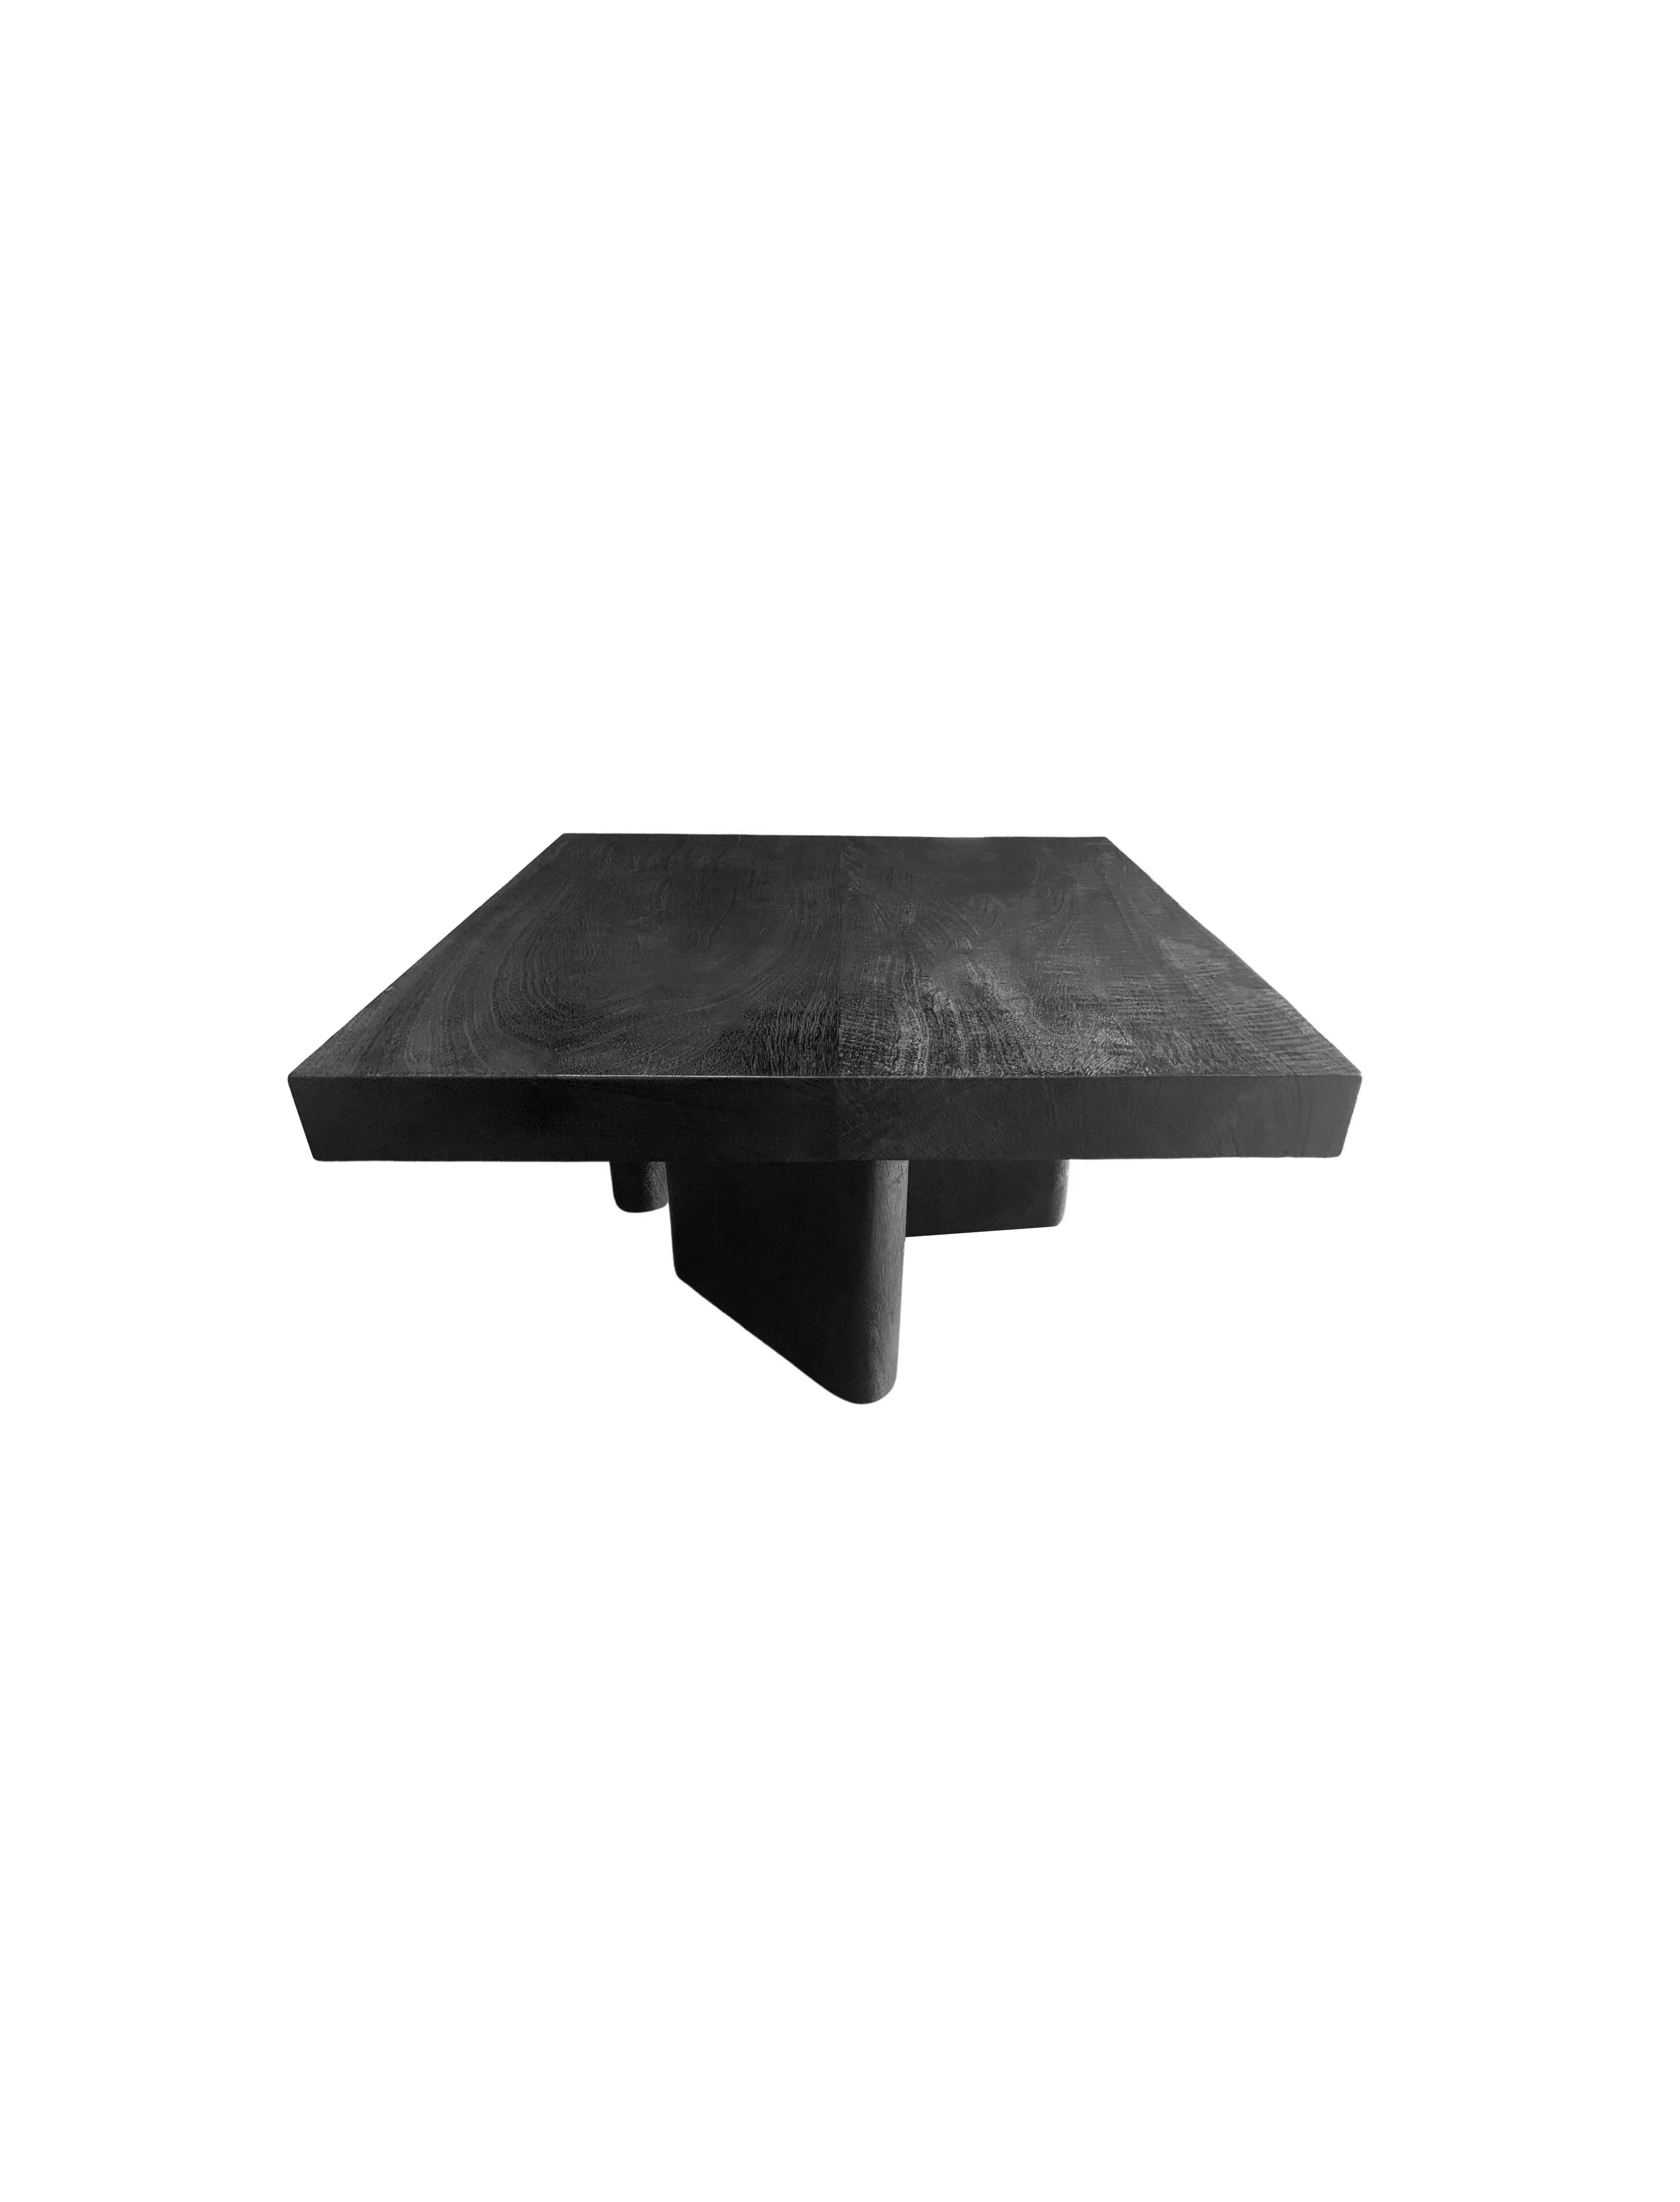 Other Sculptural Mango Wood Table Burnt Finish Modern Organic For Sale